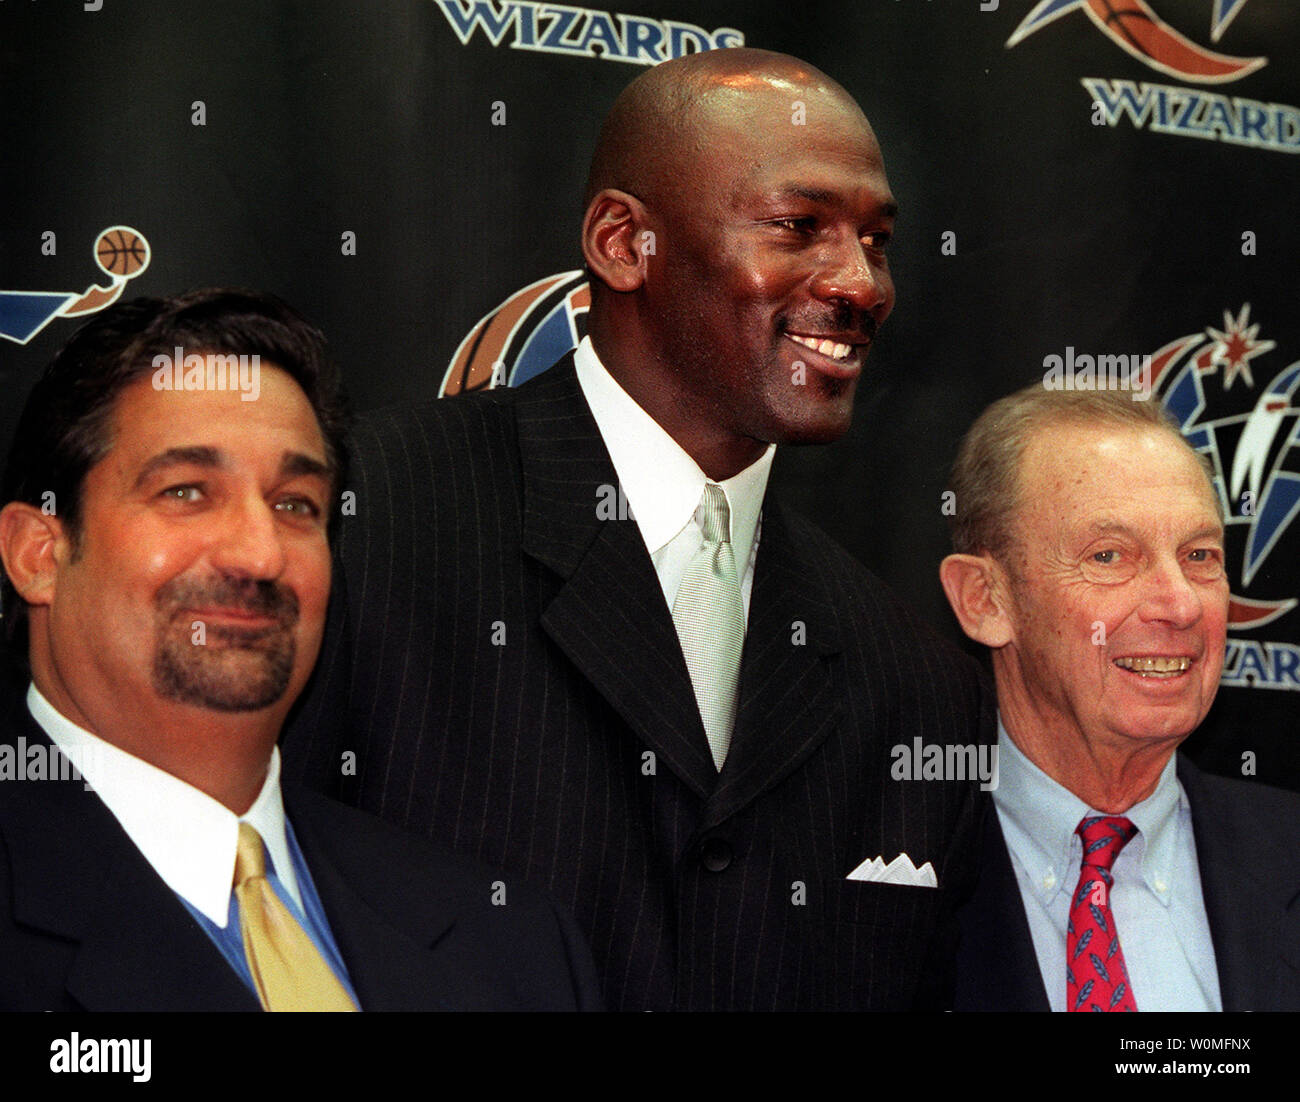 https://c8.alamy.com/comp/W0MFNX/washington-wizards-owner-abe-pollinr-shown-in-2000-file-photo-died-on-november-24-2009-at-the-age-of-85-pollin-considered-his-greatest-achievement-was-the-verizon-center-risking-his-personal-fortune-on-a-venture-that-revitalized-downtown-washington-opening-in-1997-he-is-shown-with-washington-capitals-owner-ted-leonsis-l-who-has-first-refusal-to-buy-pollins-washington-sports-and-entertainment-holdings-and-michael-jordan-upifiles-W0MFNX.jpg